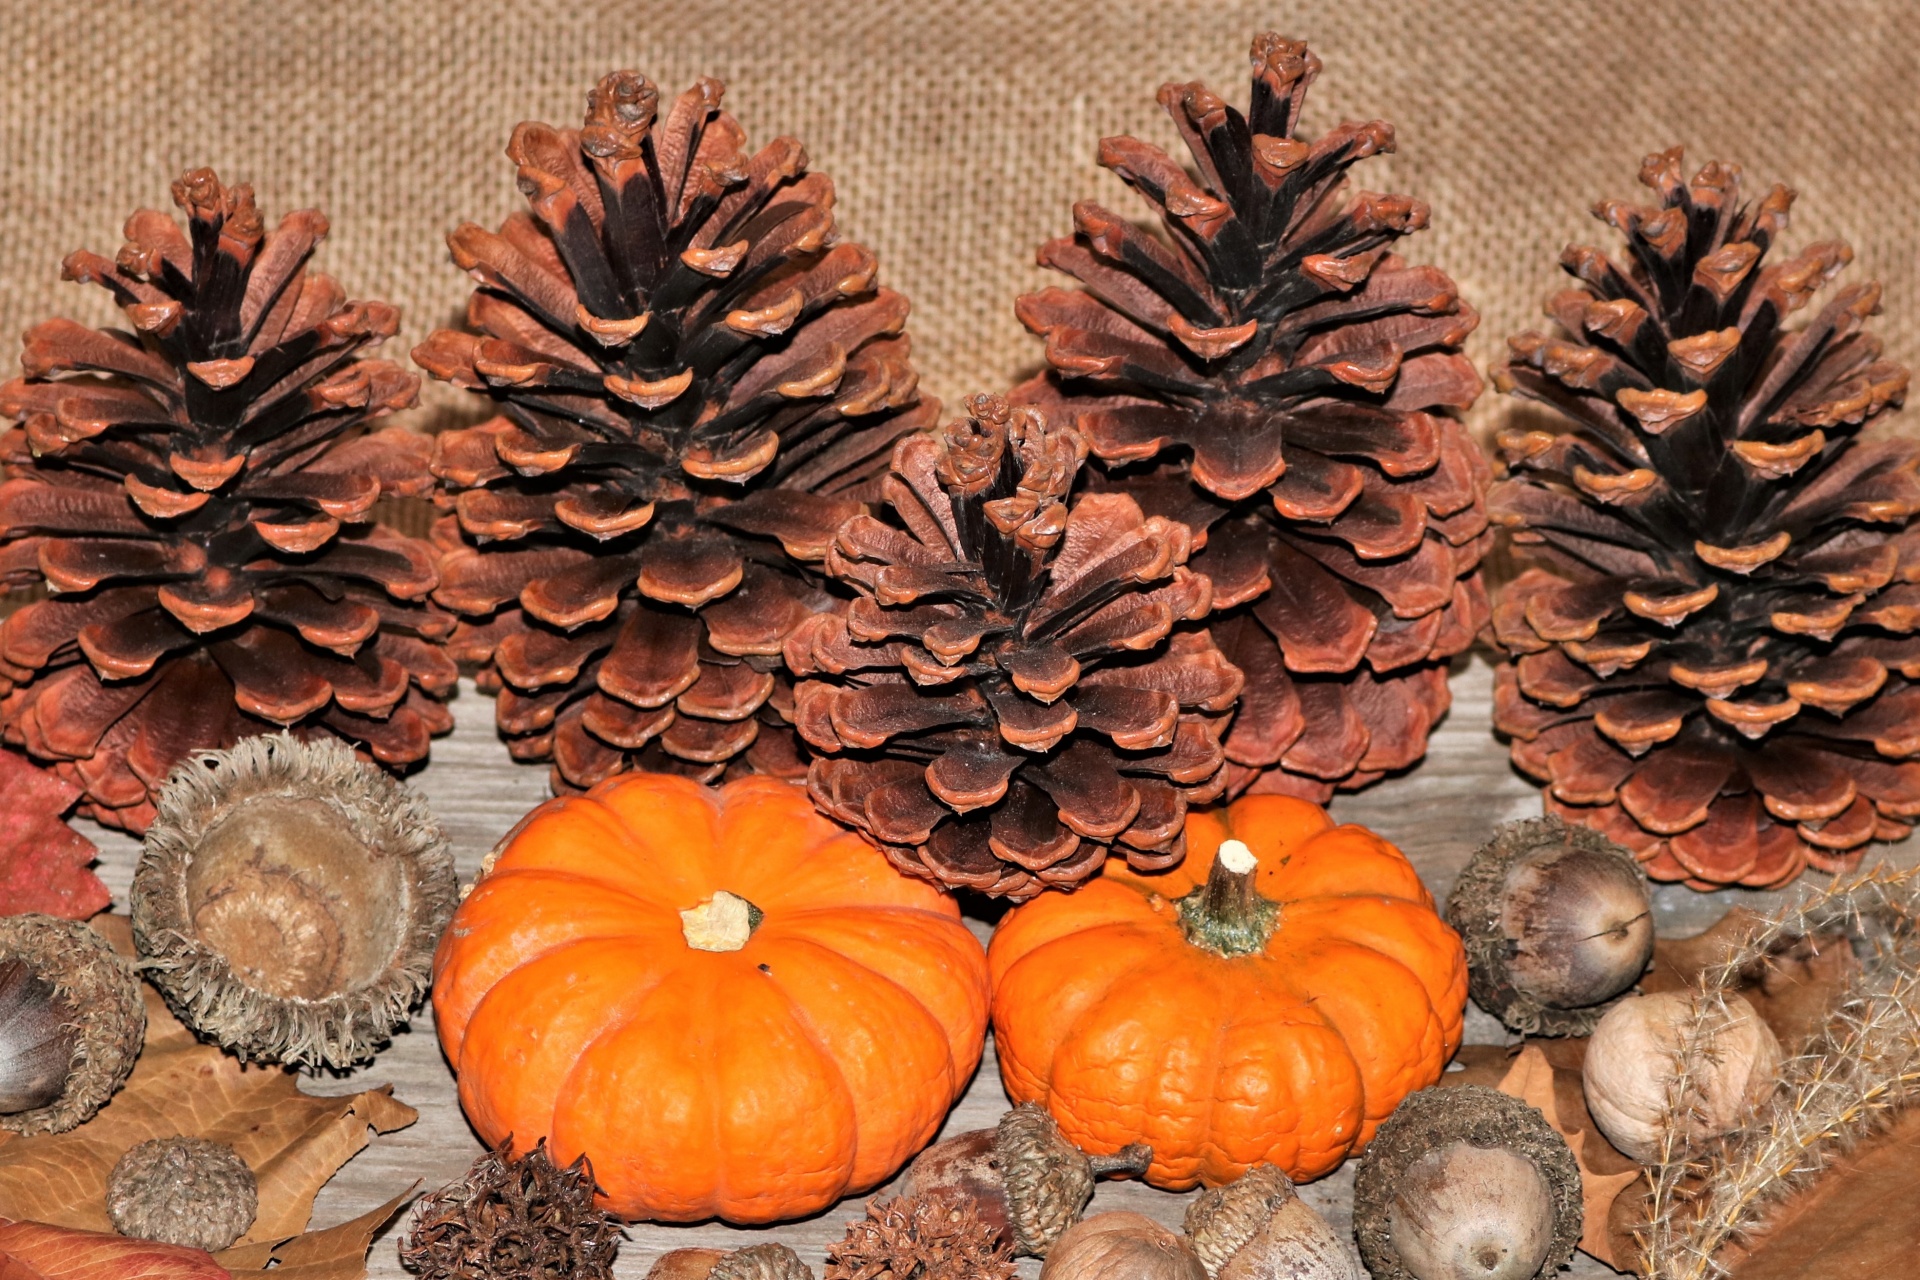 Close-up of two little pumpkins with pine cones and acorns.